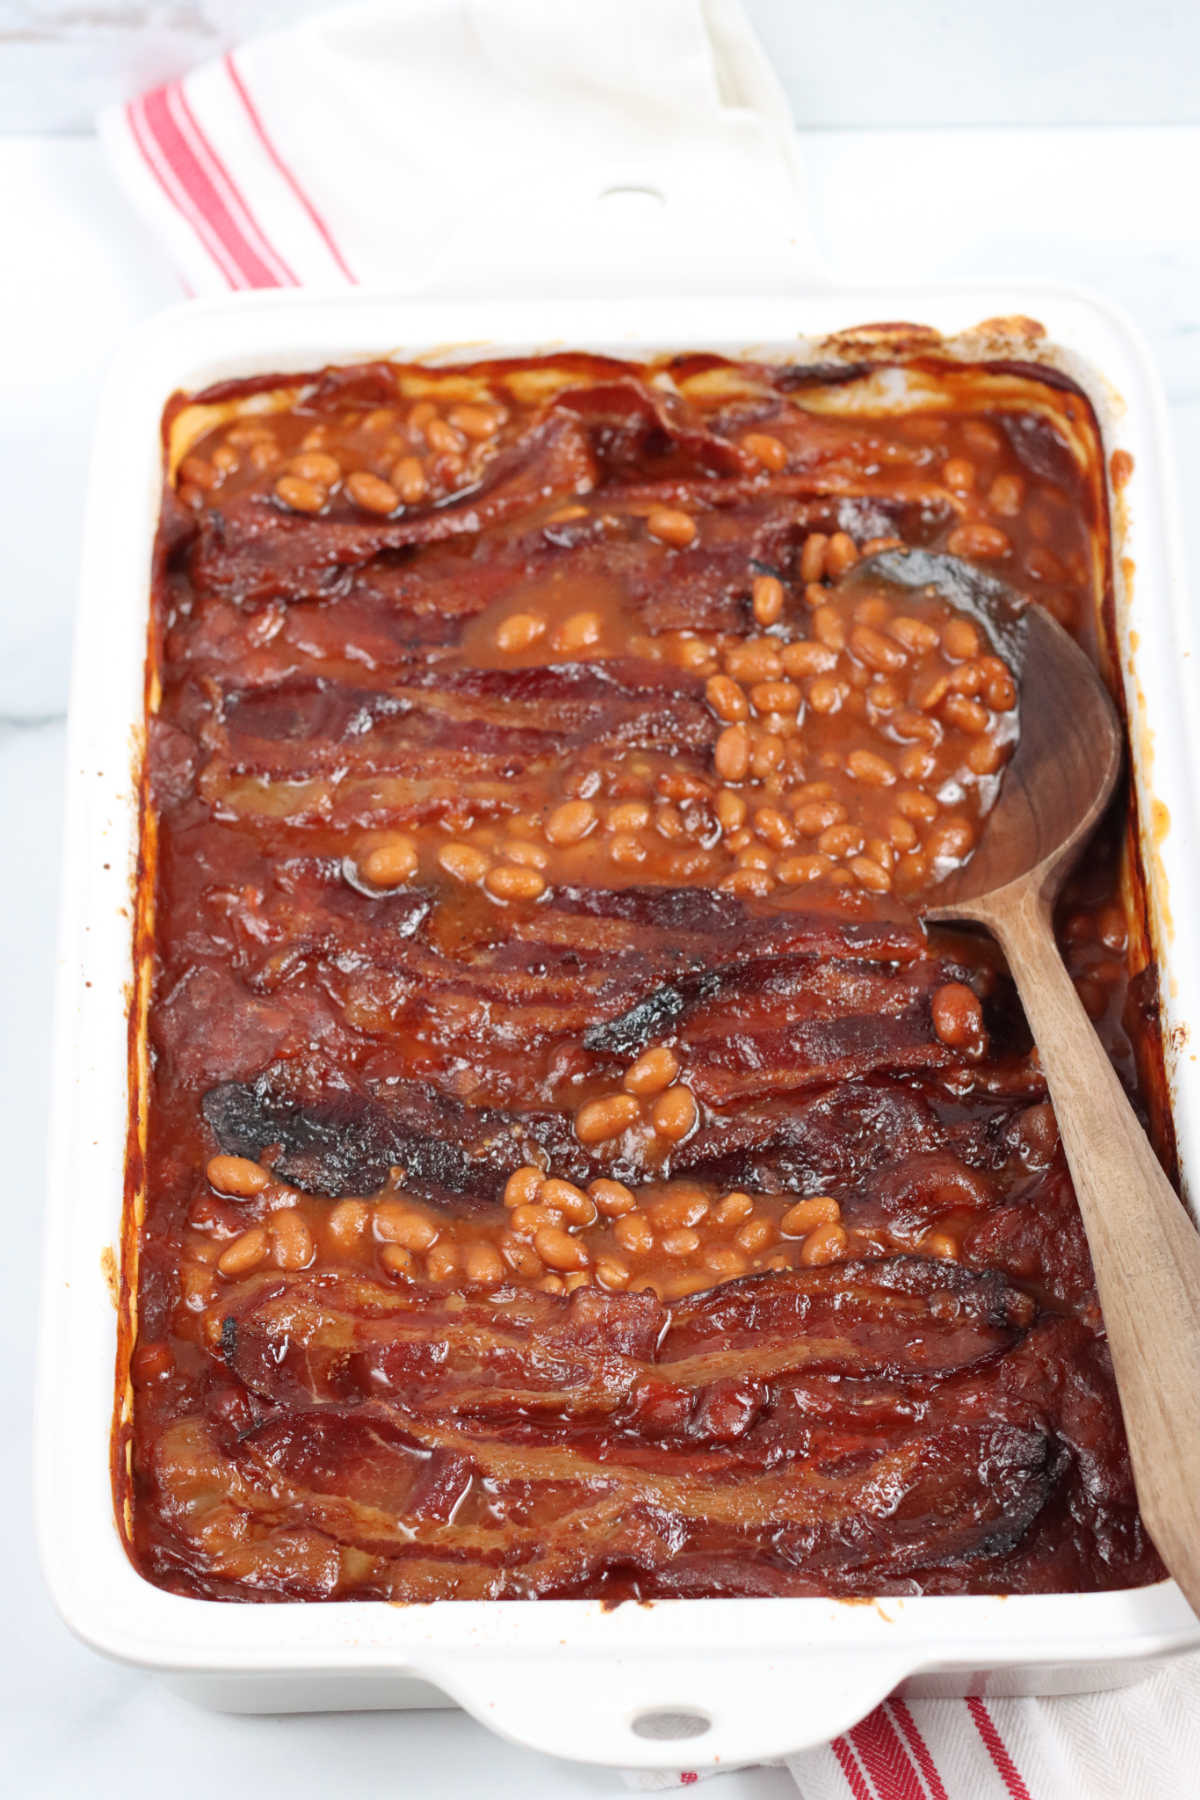 Baked beans in white rectangle baking dish, wooden spoon on right.